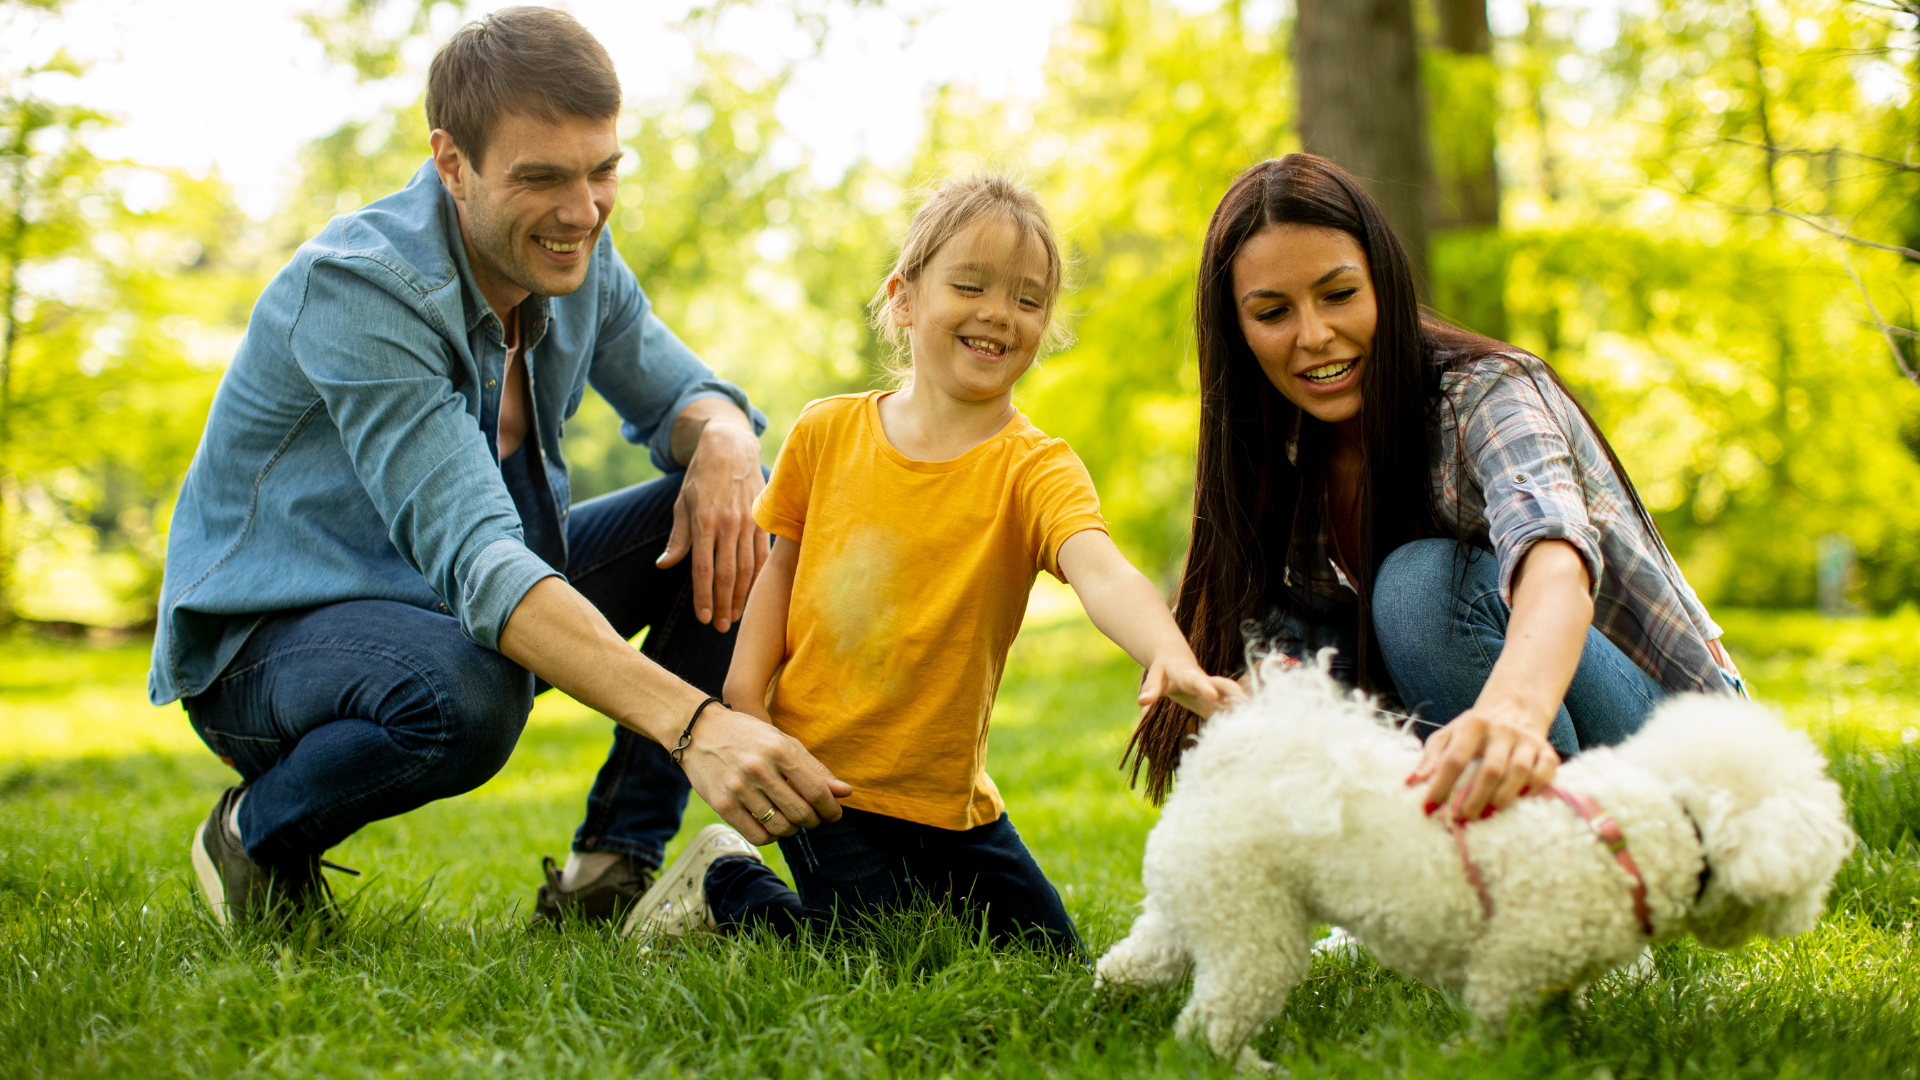 Outdoor Family Activities with Dog